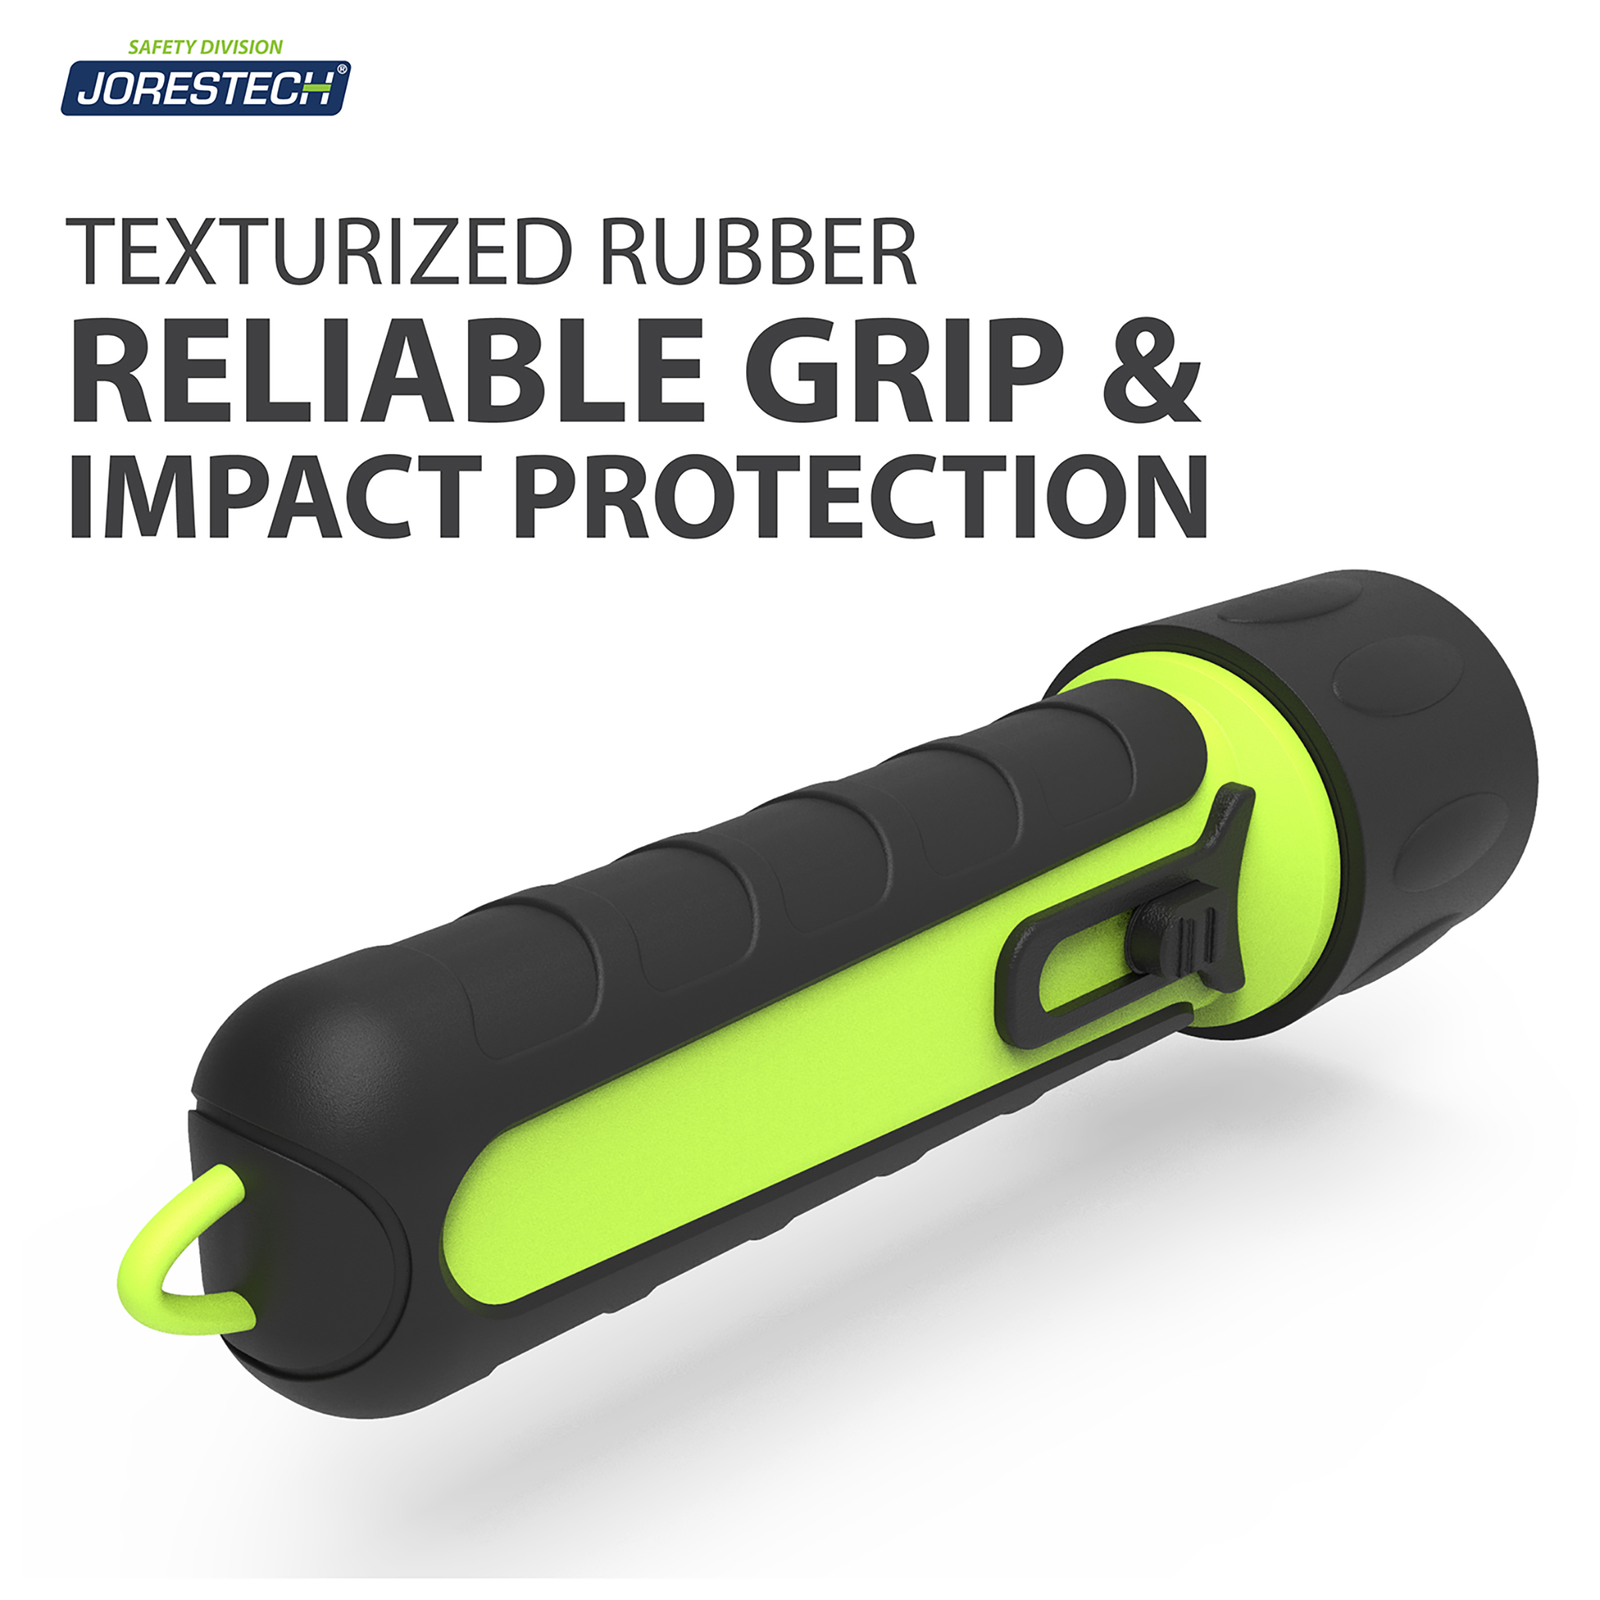 Back view of 1 ultra light bright weatherproof JORESTECH® black and lime flashlight. Text reads: Texturized rubber reliable grip & impact protection